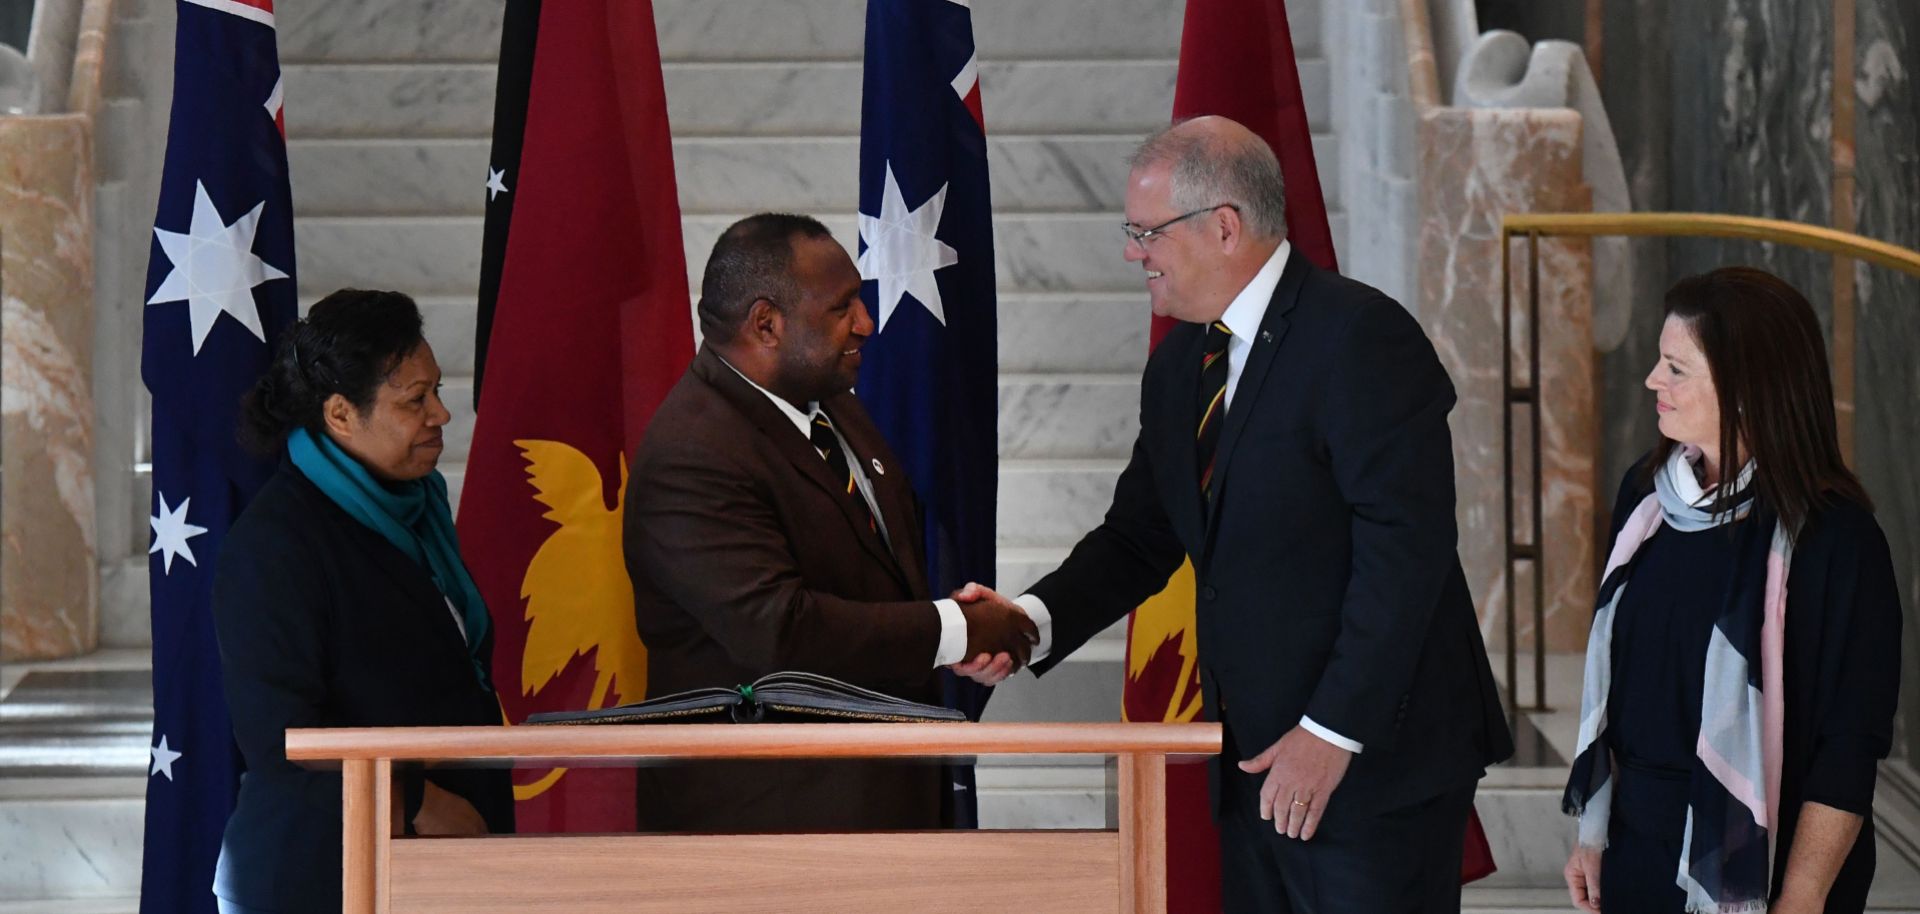 Papua New Guinea's Prime Minister James Marape (left) shakes hands with Australia's Prime Minister Scott Morrison as their wives look on in Canberra during July.